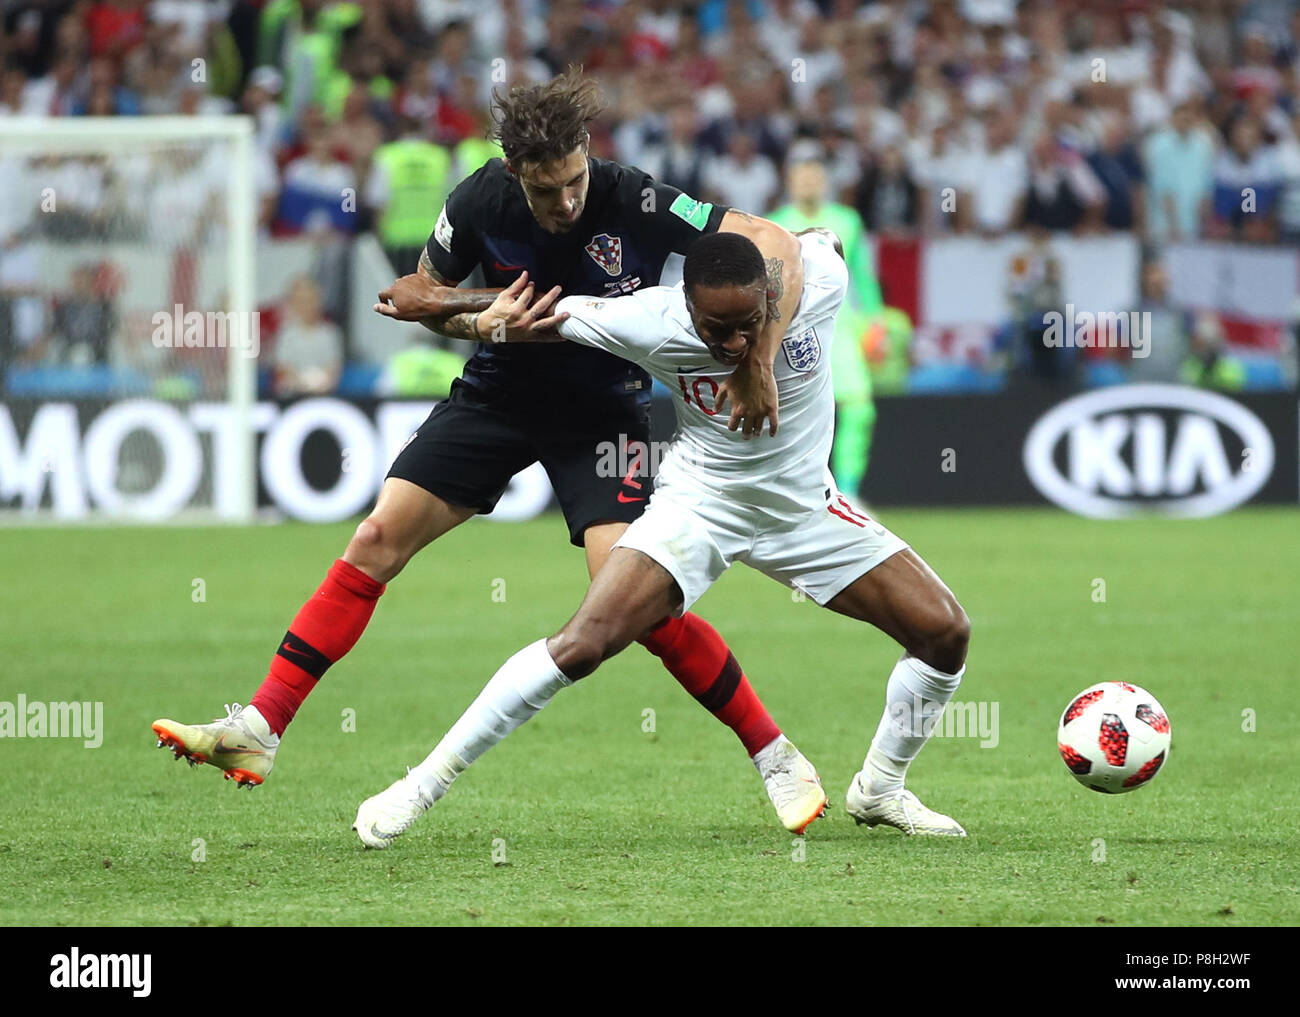 Moscow, Russia. 11th July, 2018. Raheem Sterling (R) of England vies with Sime Vrsaljko of Croatia during the 2018 FIFA World Cup semi-final match between England and Croatia in Moscow, Russia, July 11, 2018. Credit: Wu Zhuang/Xinhua/Alamy Live News Stock Photo